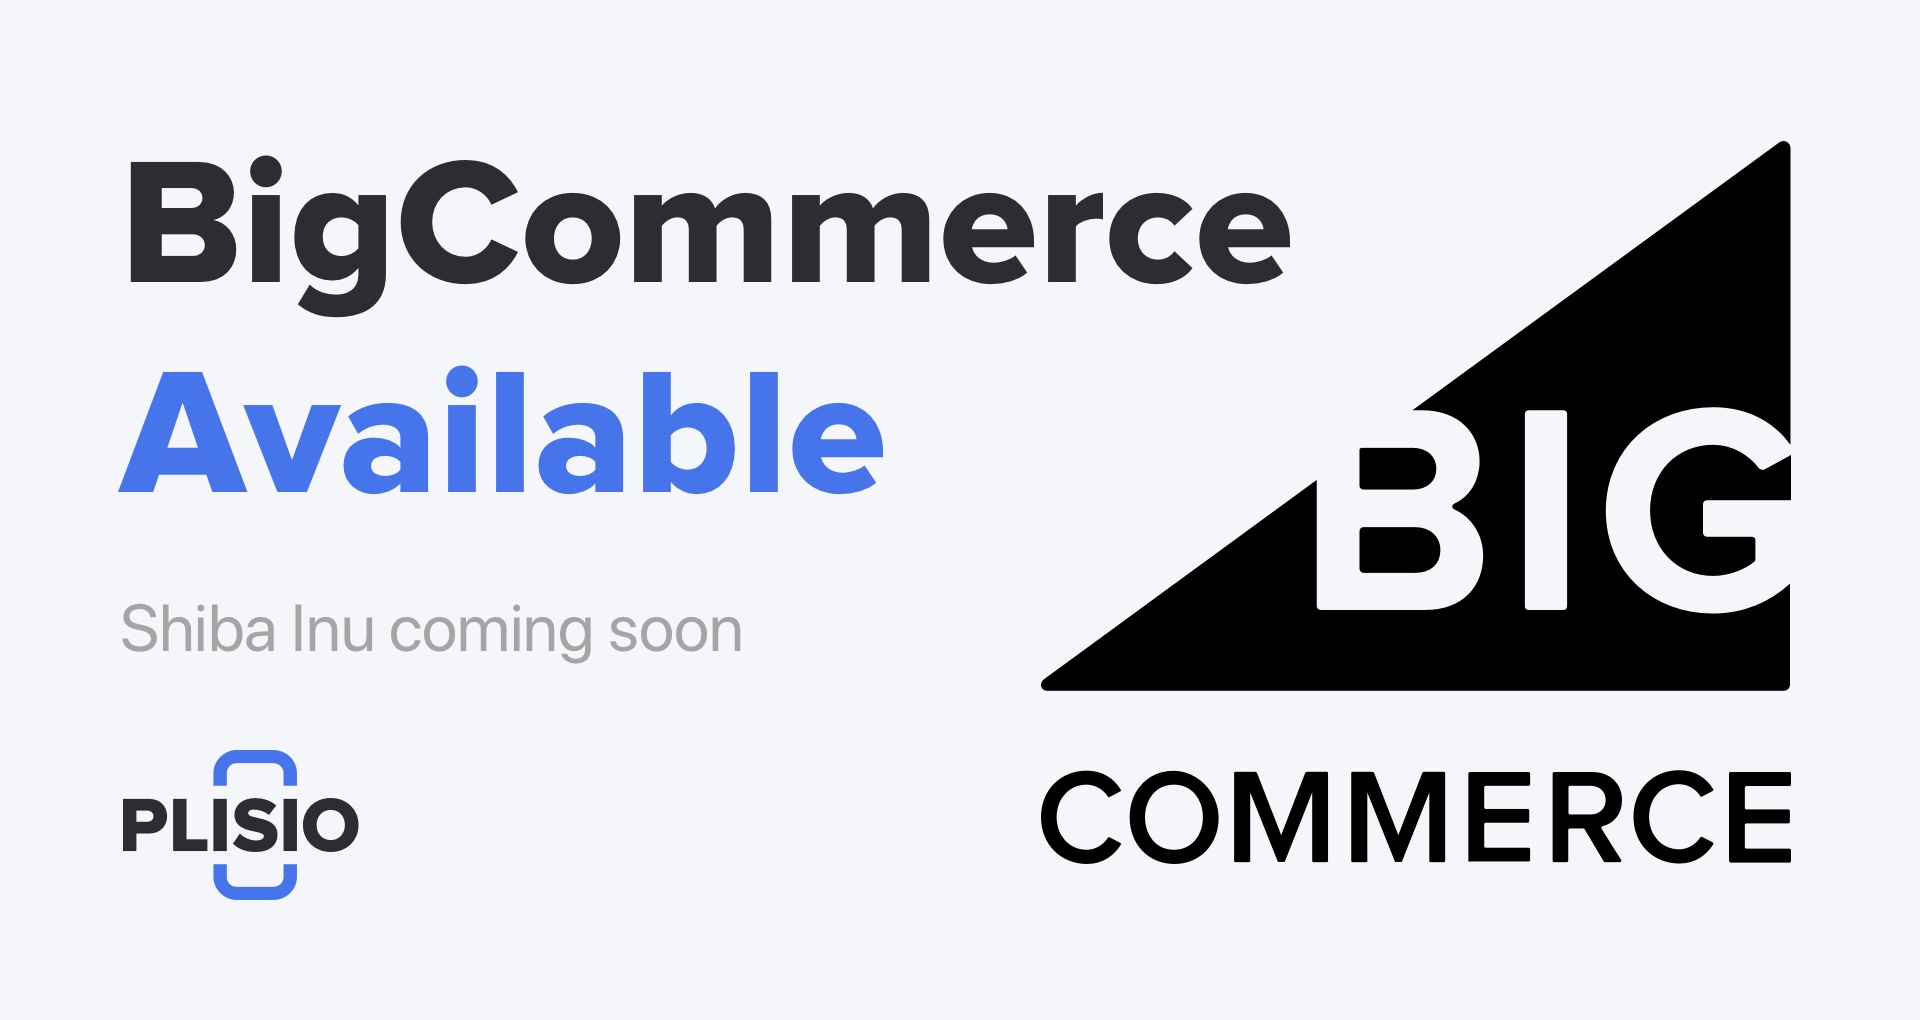 BigCommerce is Now Available! Shiba Inu and More Updates Coming So...